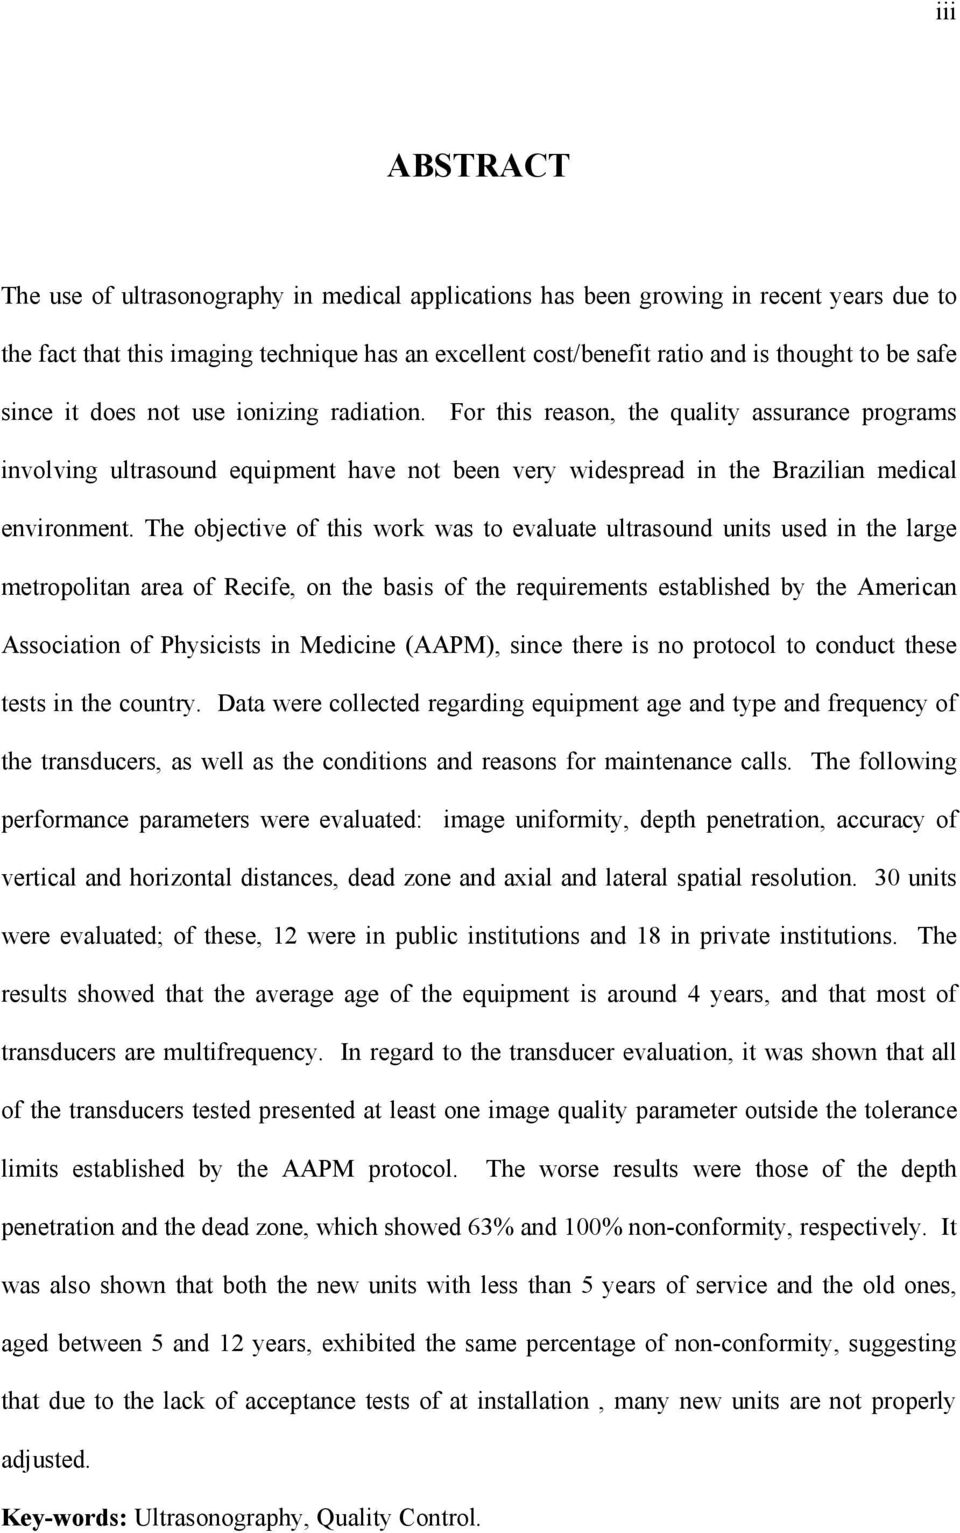 The objective of this work was to evaluate ultrasound units used in the large metropolitan area of Recife, on the basis of the requirements established by the American Association of Physicists in